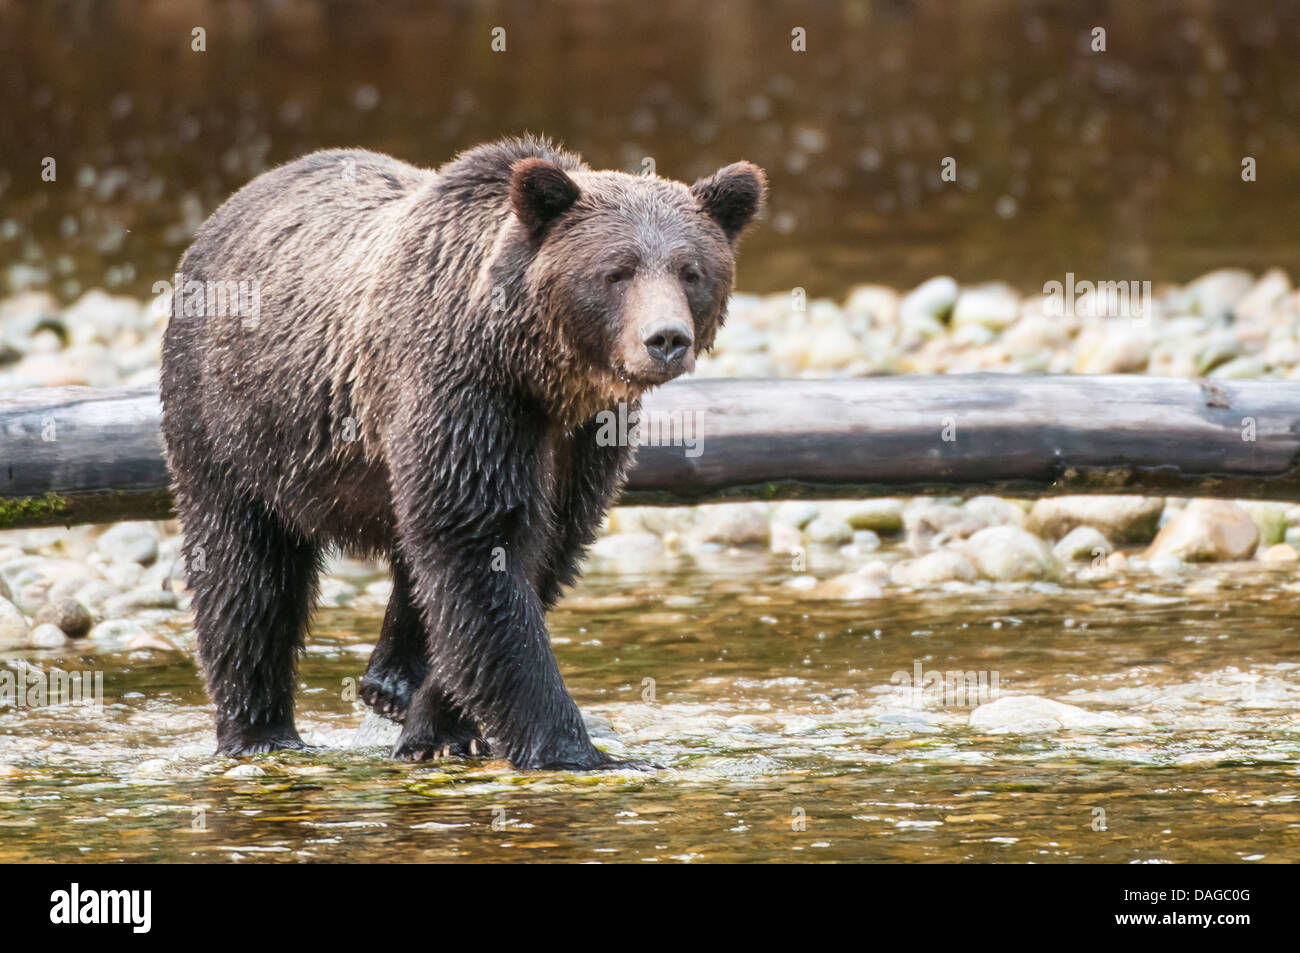 Brown or grizzly bear (Ursus arctos) fishing for salmon in Great Bear Rainforest, British Columbia, Canada. Stock Photo